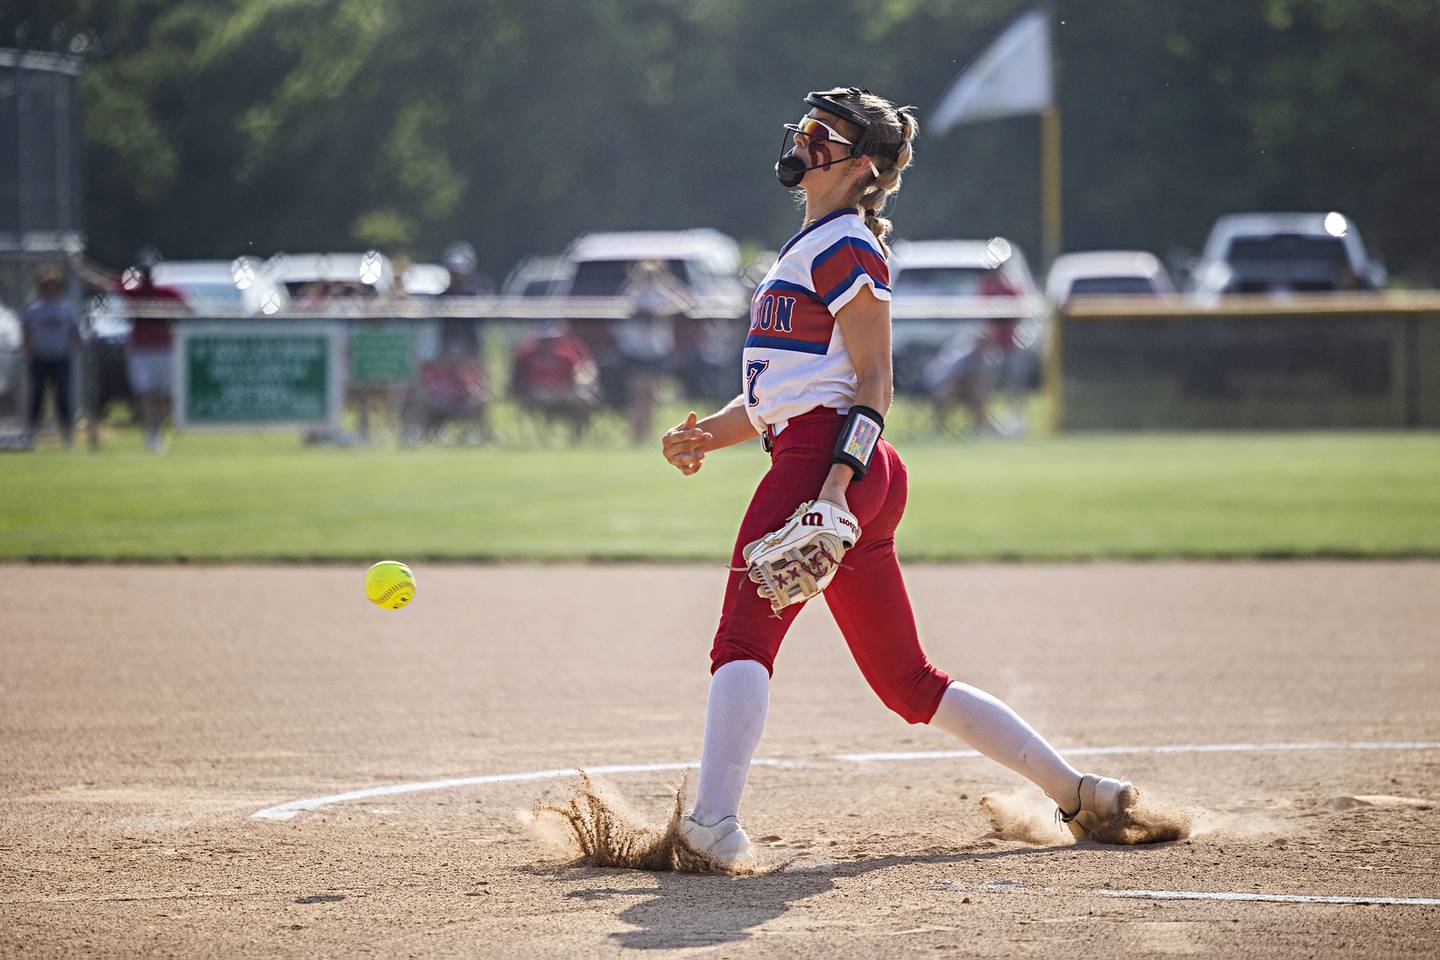 Morrison’s Bella Duncan fires a pitch against West Central on Wednesday, May 24, 2023 during their Class 1A sectional semifinal at St. Bede Academy.